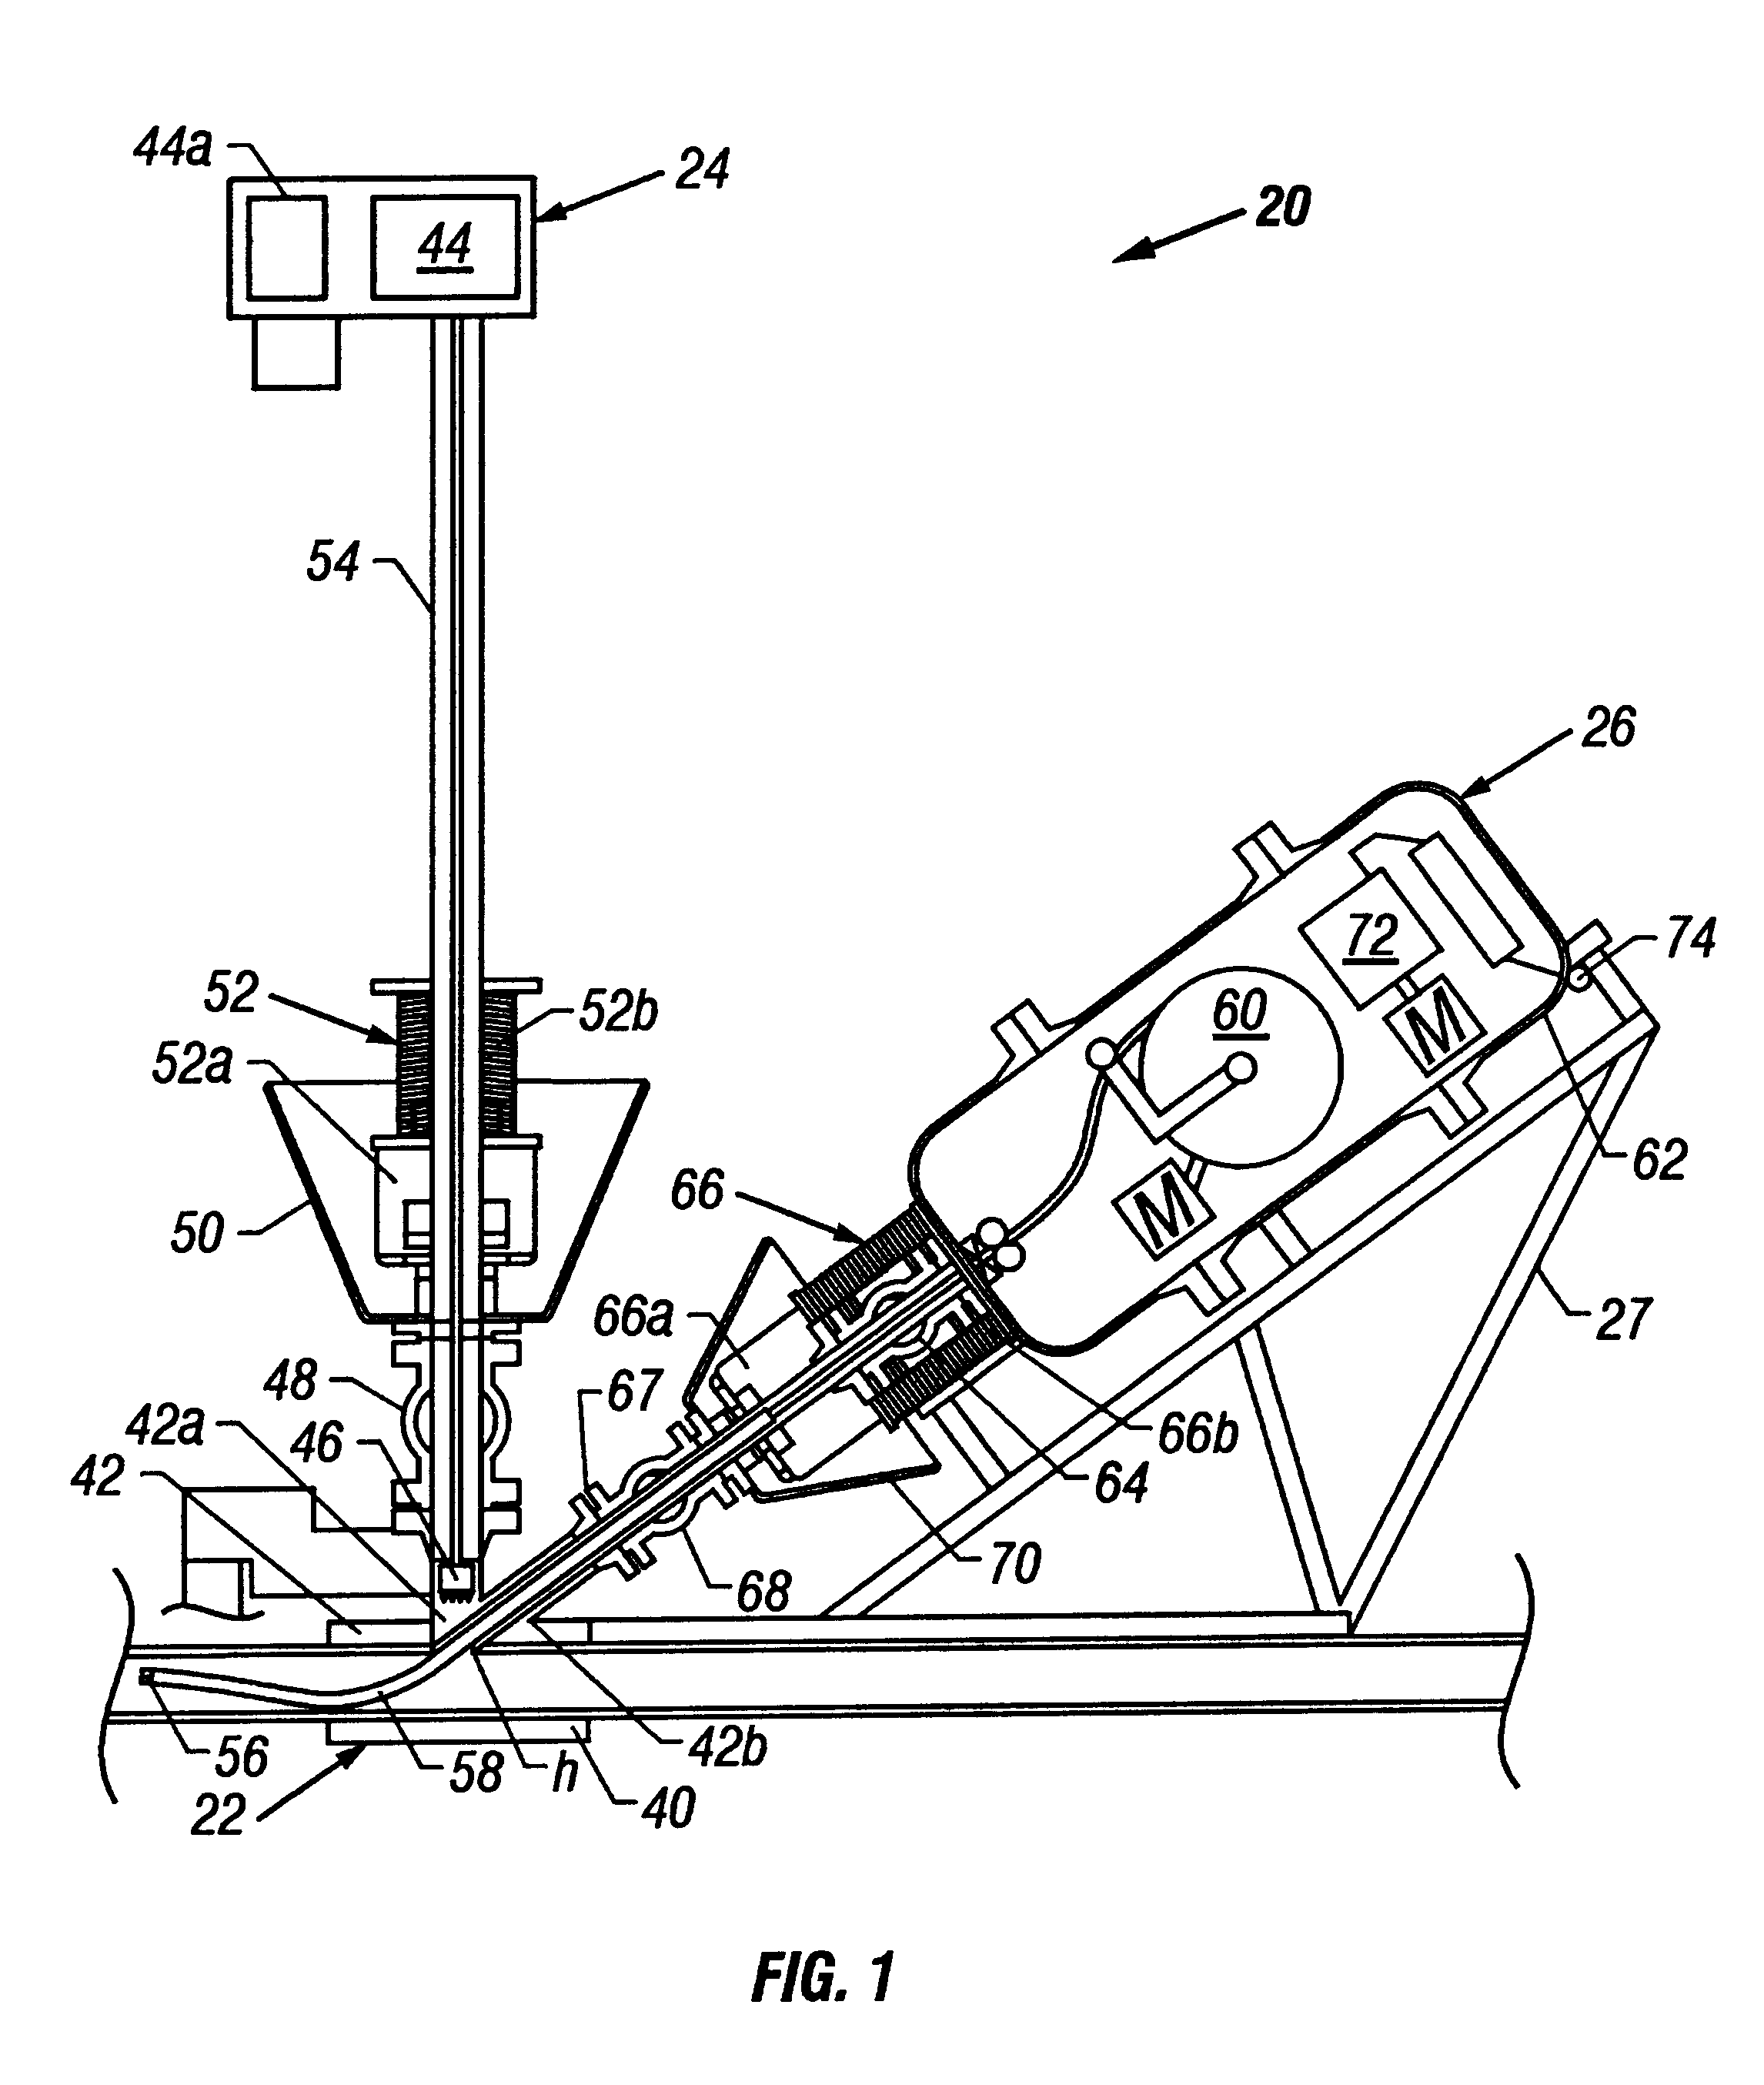 Hot tap fluid blaster apparatus and method of using same